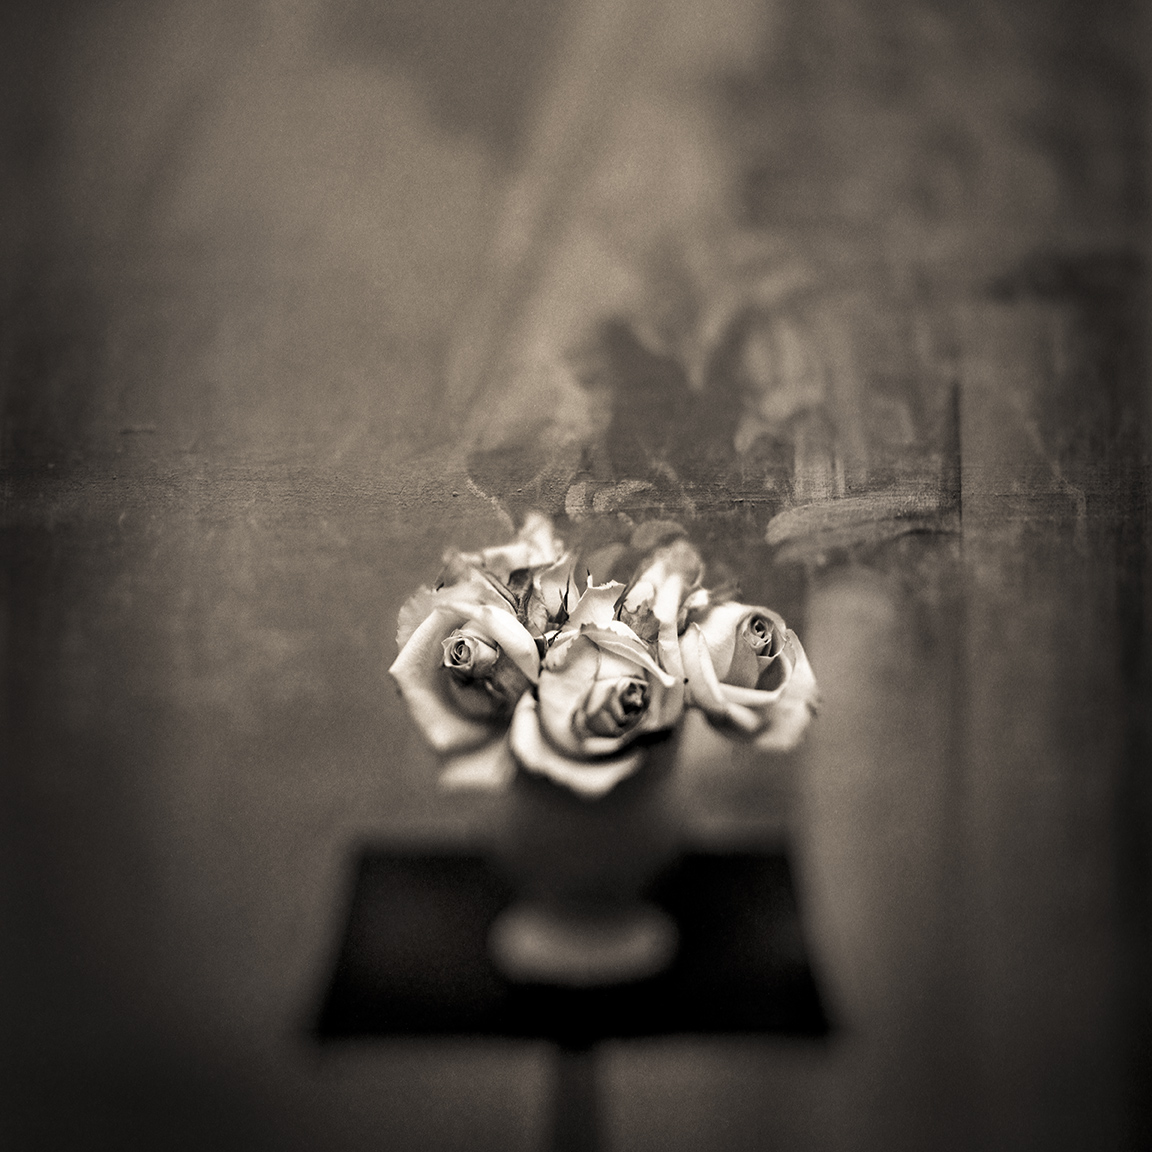 Keith Carter, White Roses, 1998